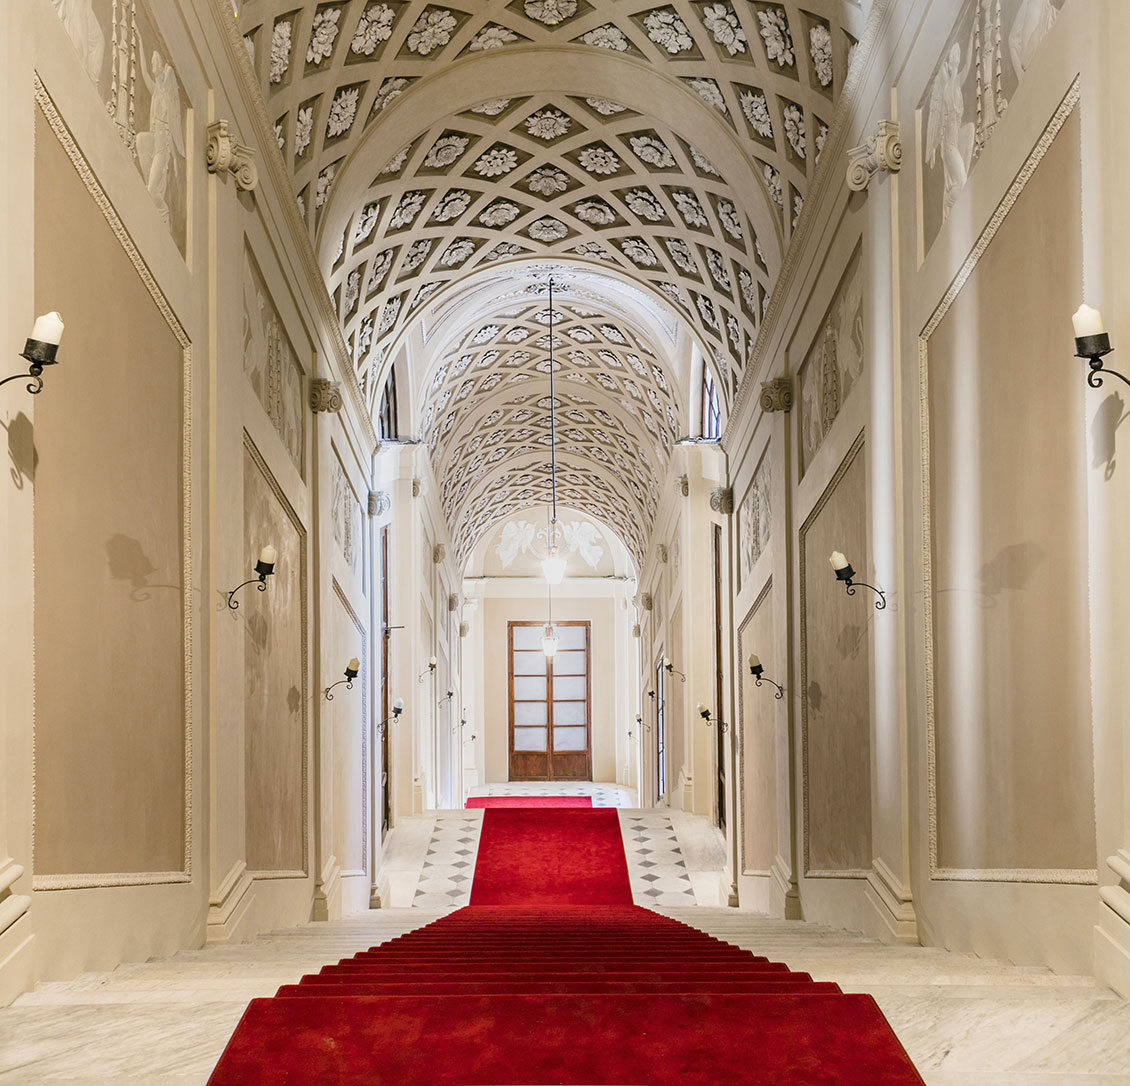 The last two flights of the Royal Staircase with a celebratory red carpet